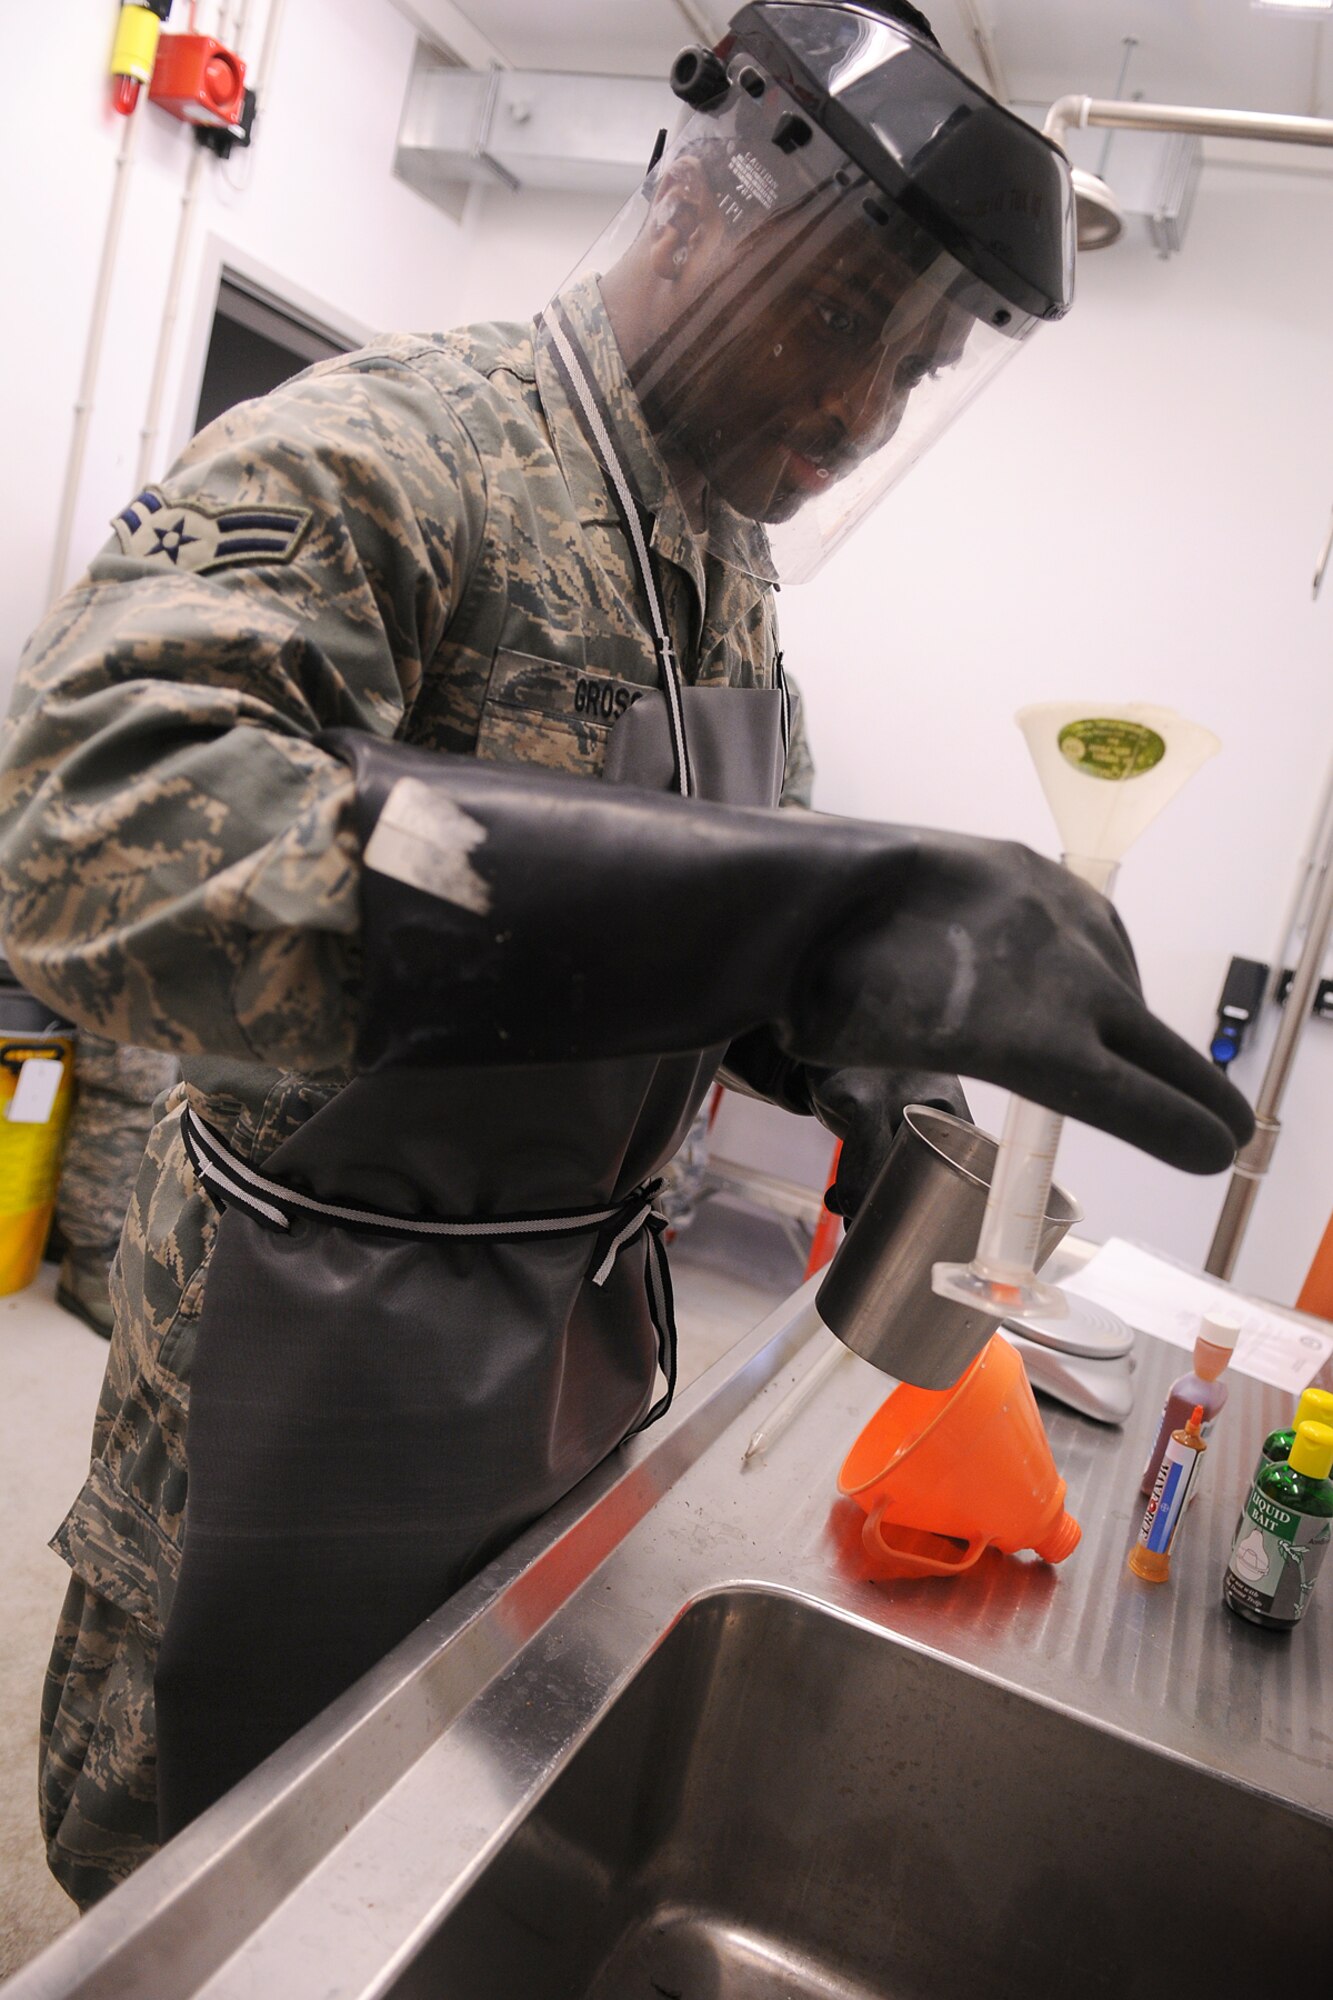 SPANGDAHLEM AIR BASE, Germany -- Airman 1st Class Antonio Gross, 52nd Civil Engineer Squadron entomology shop, mixes chemicals for a pesticide treatment to reduce the mosquito population on Perimeter Road here Oct. 6. The entomology shop is responsible for all rodent and pest control on the base. (U.S. Air Force photo/Airman 1st Class Nathanael Callon)